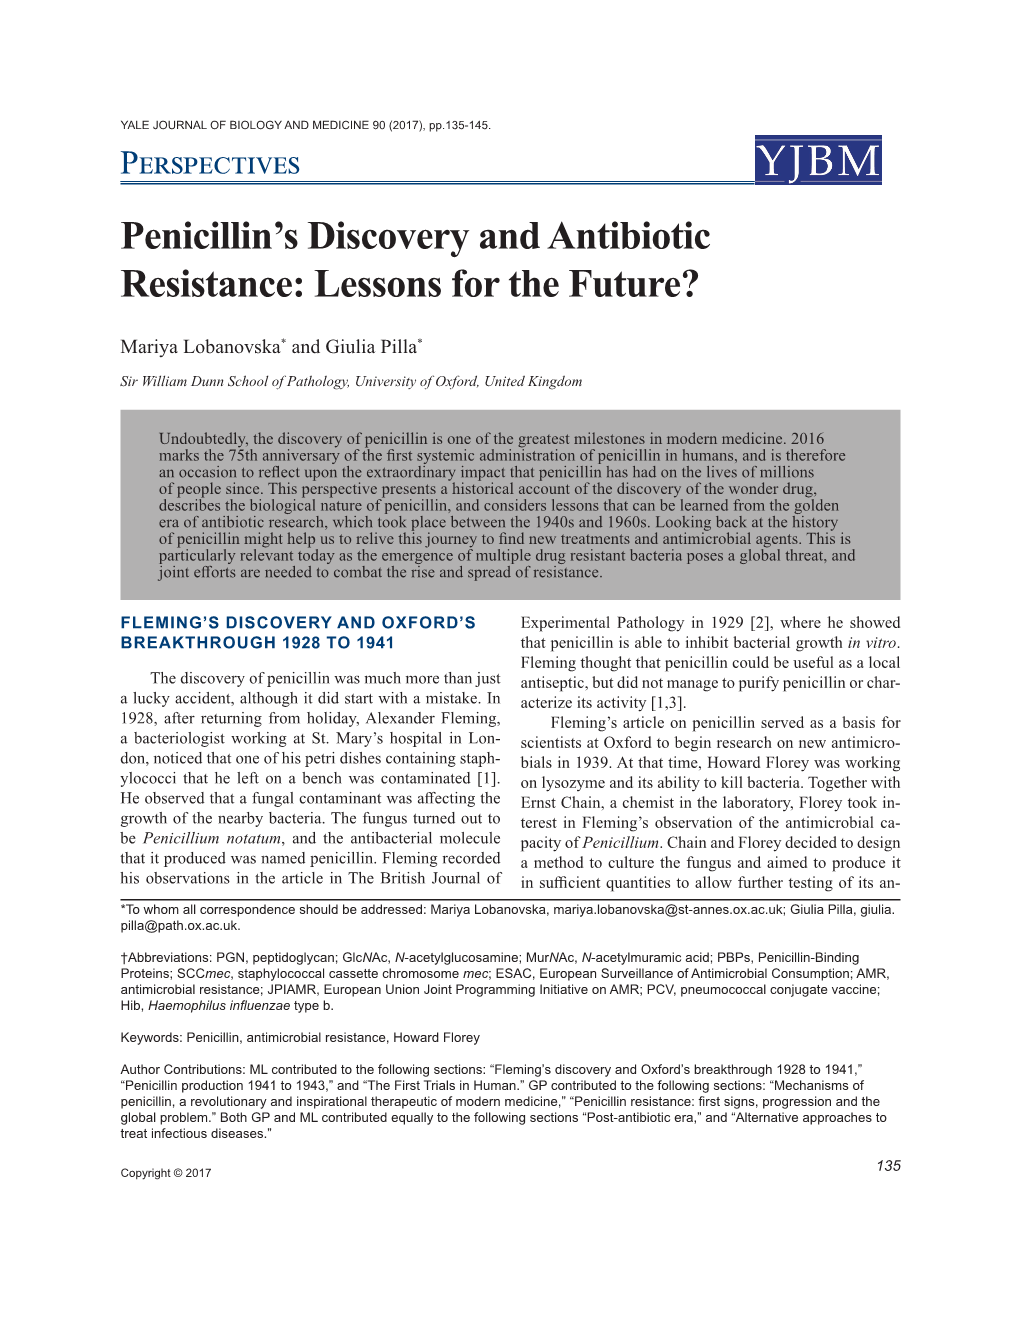 Penicillin's Discovery and Antibiotic Resistance